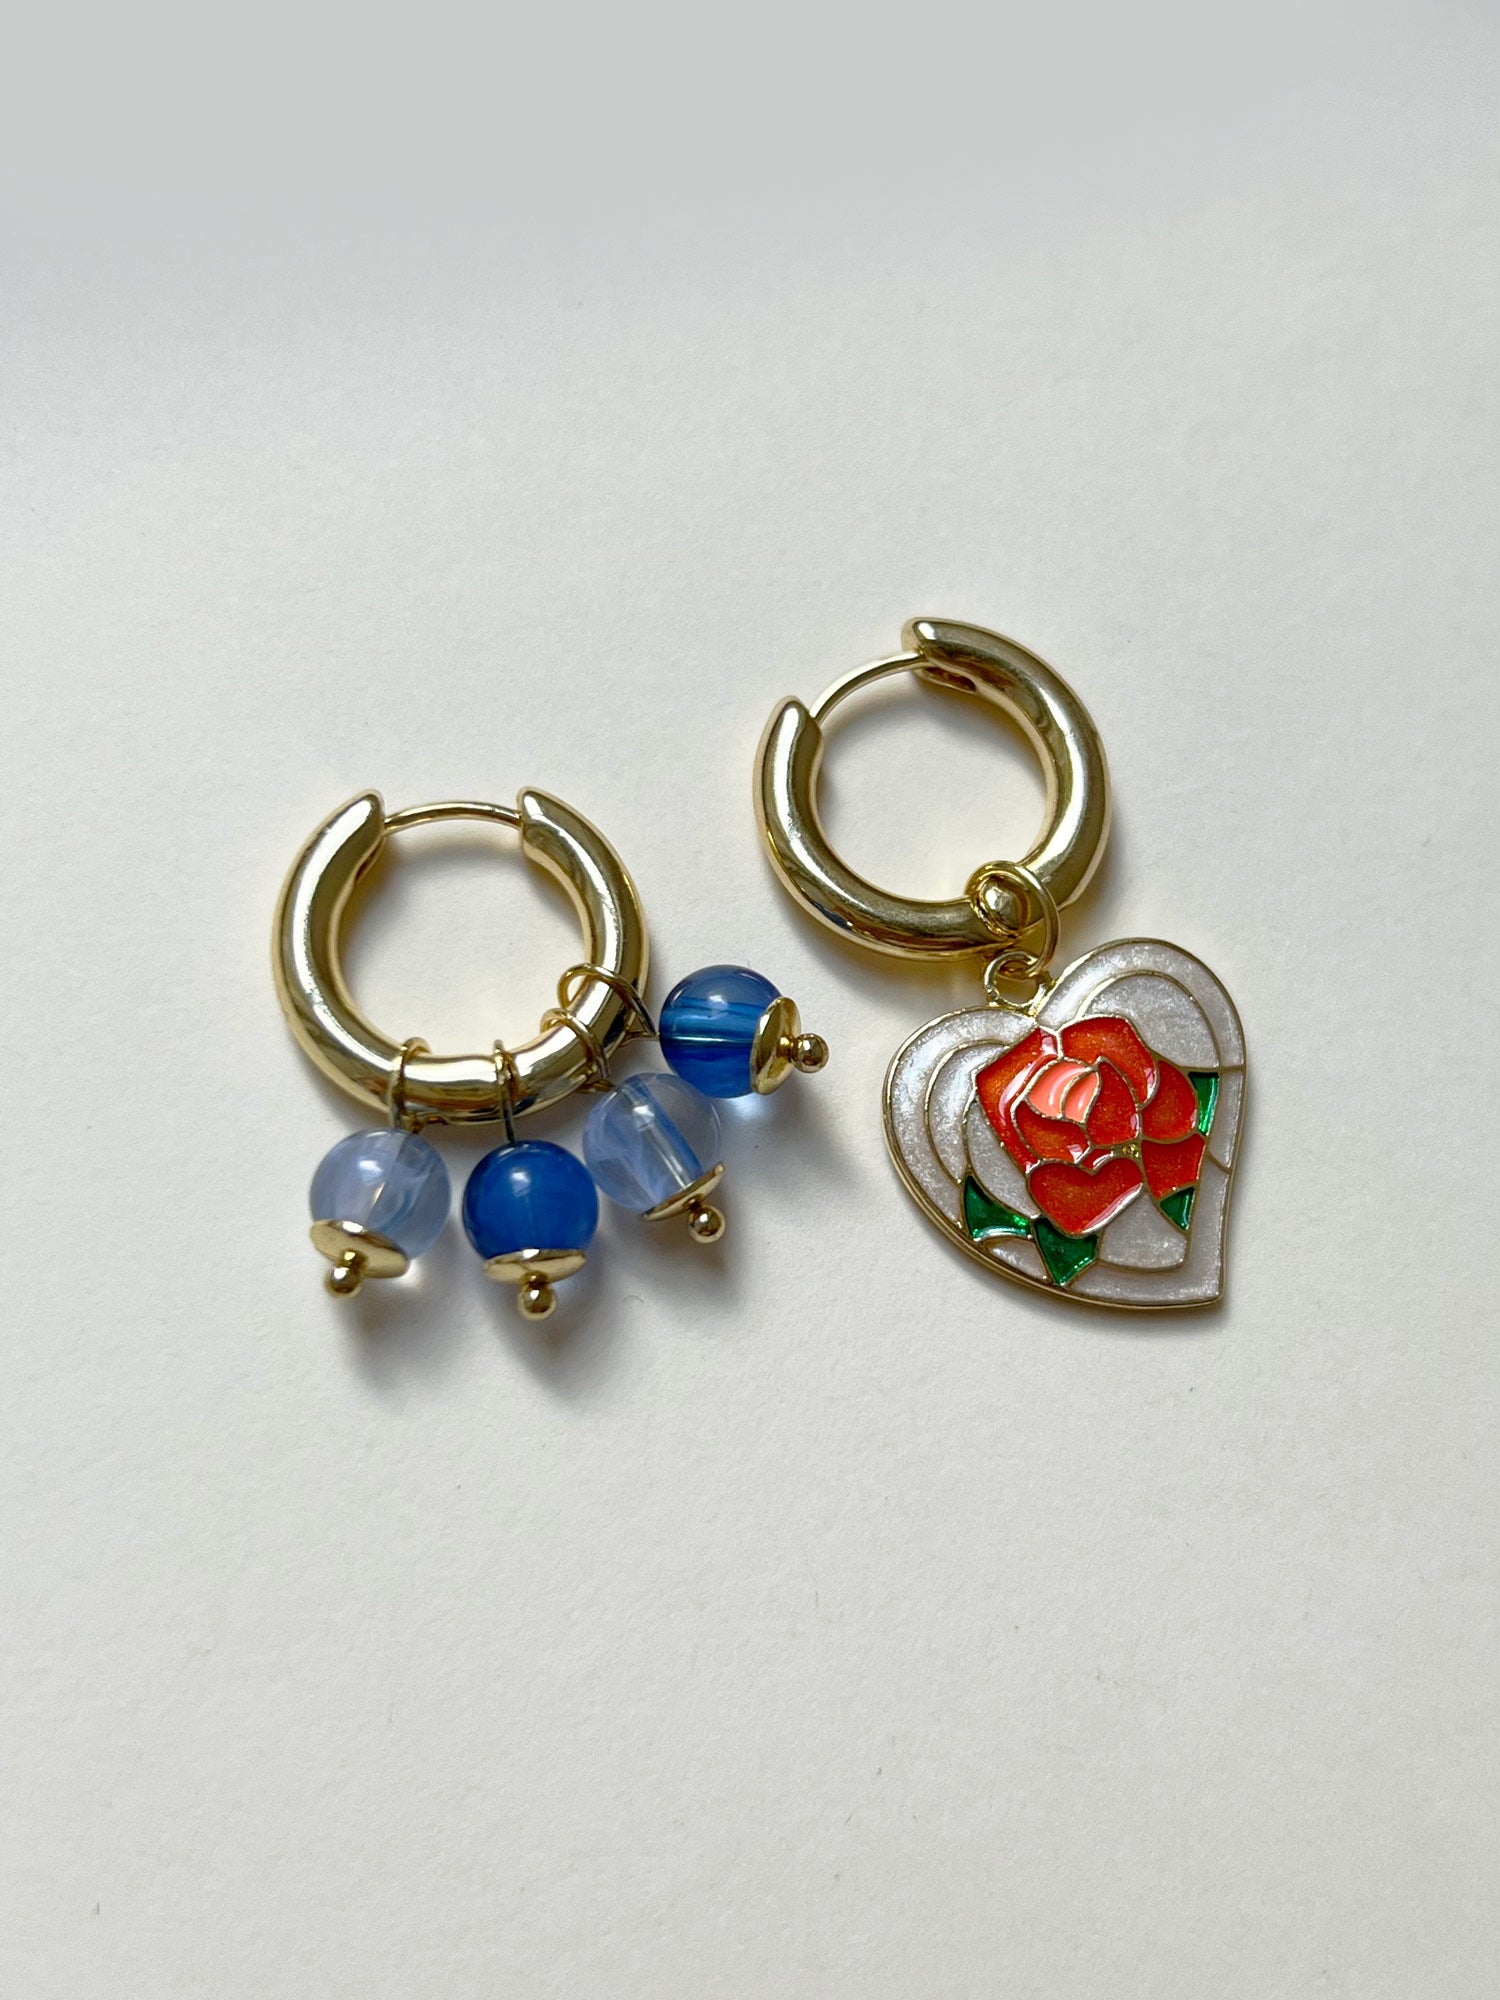 Rose Heart Mismatched Hoops with Blue Natural Stones